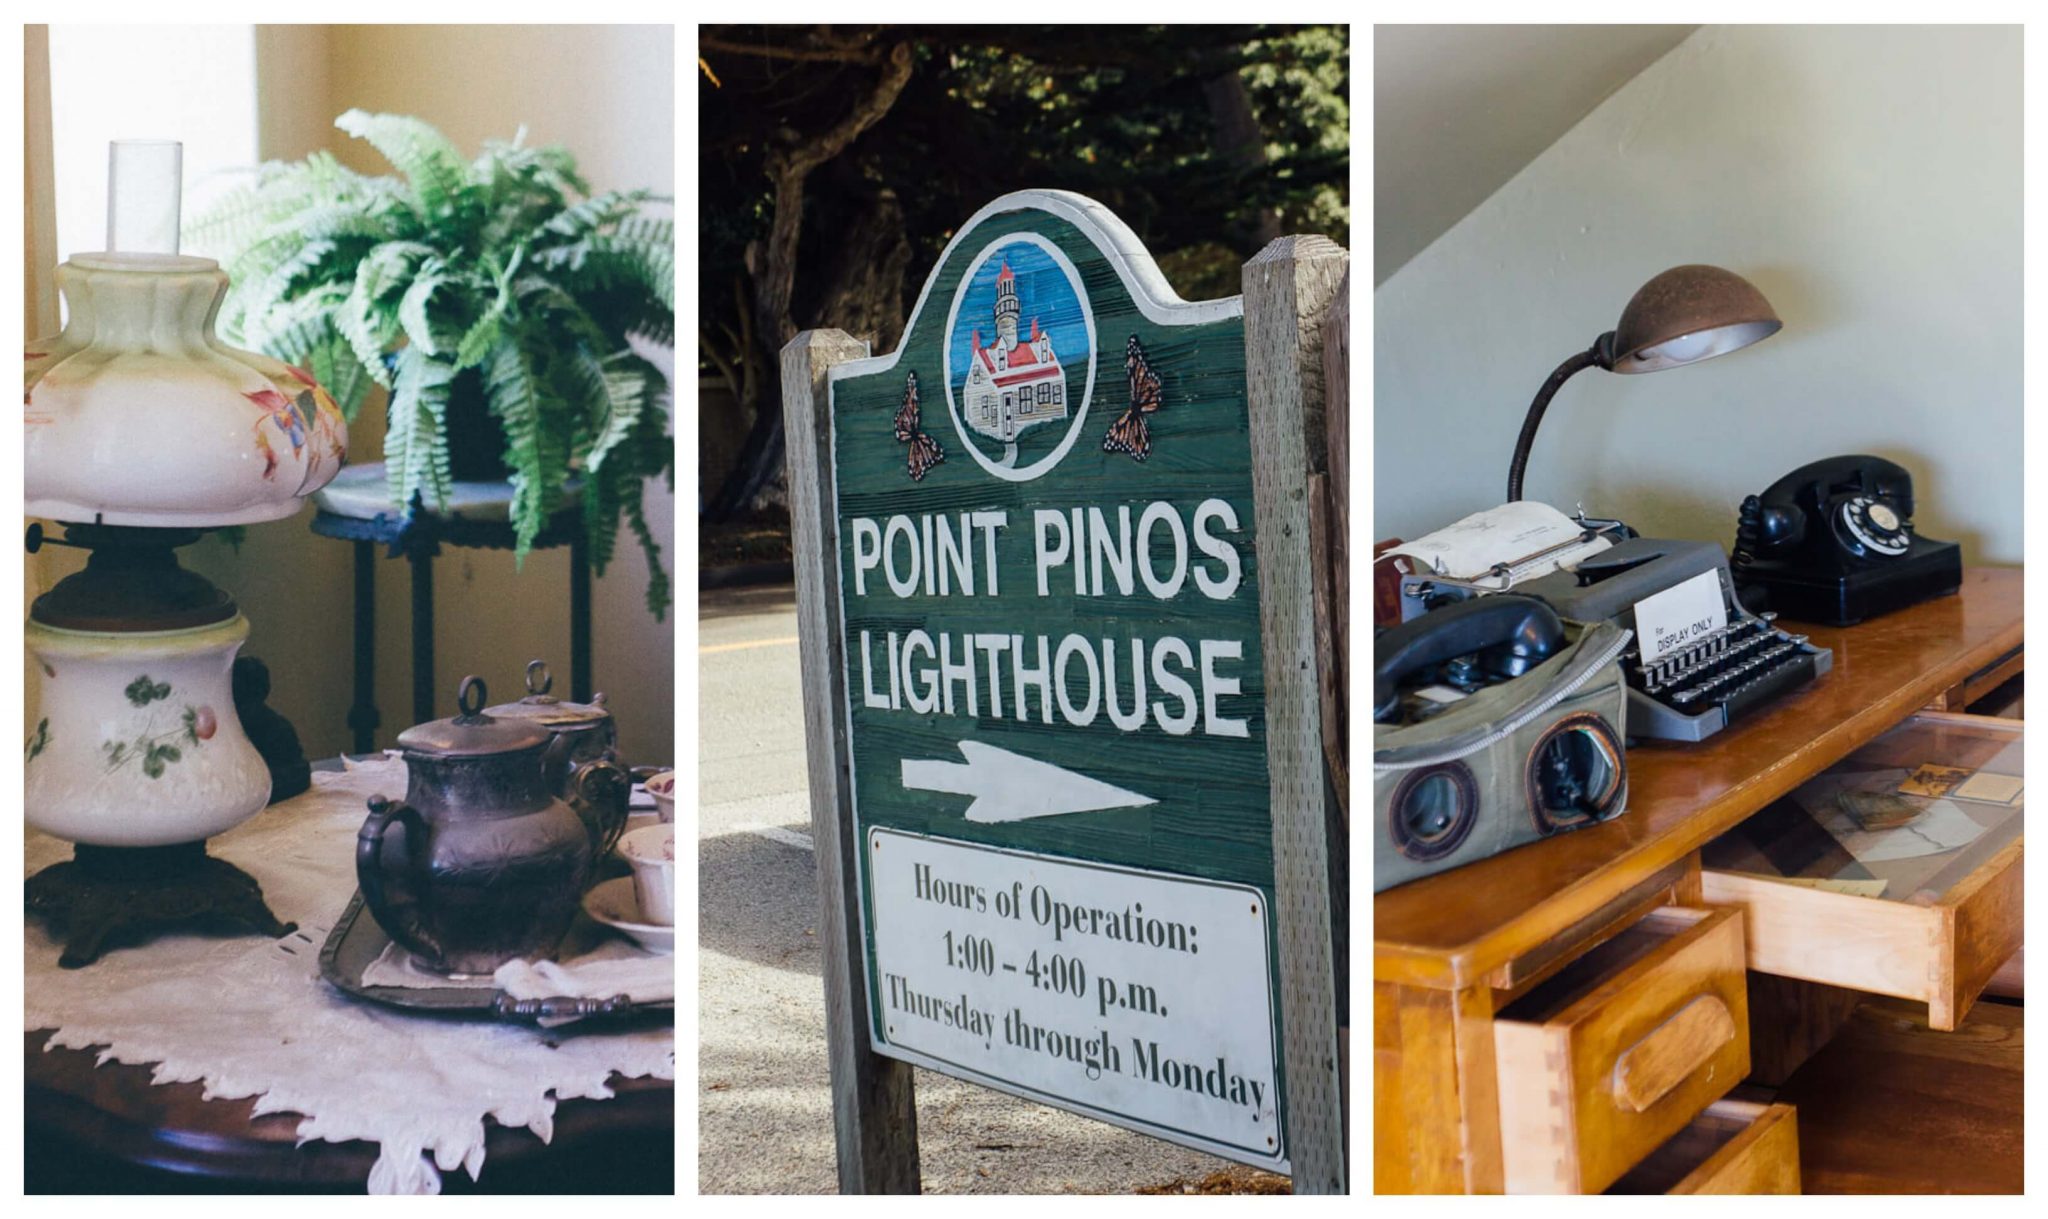 Point Pinos Lighthouse museum